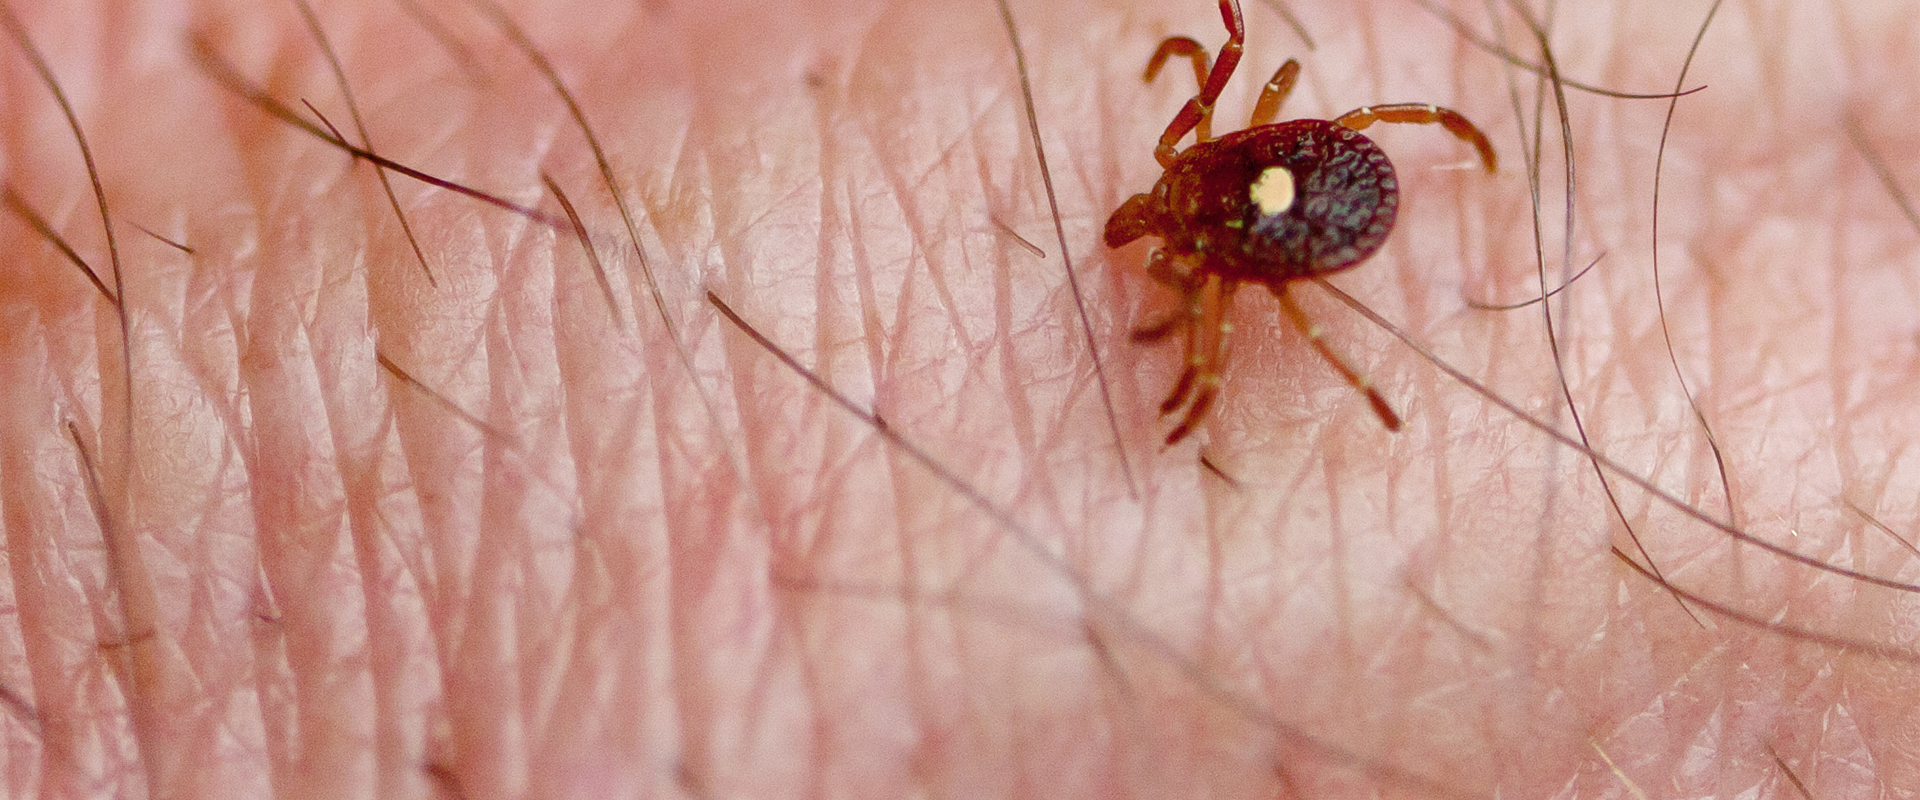 virginia woman with a lone star tick crawling on her arm